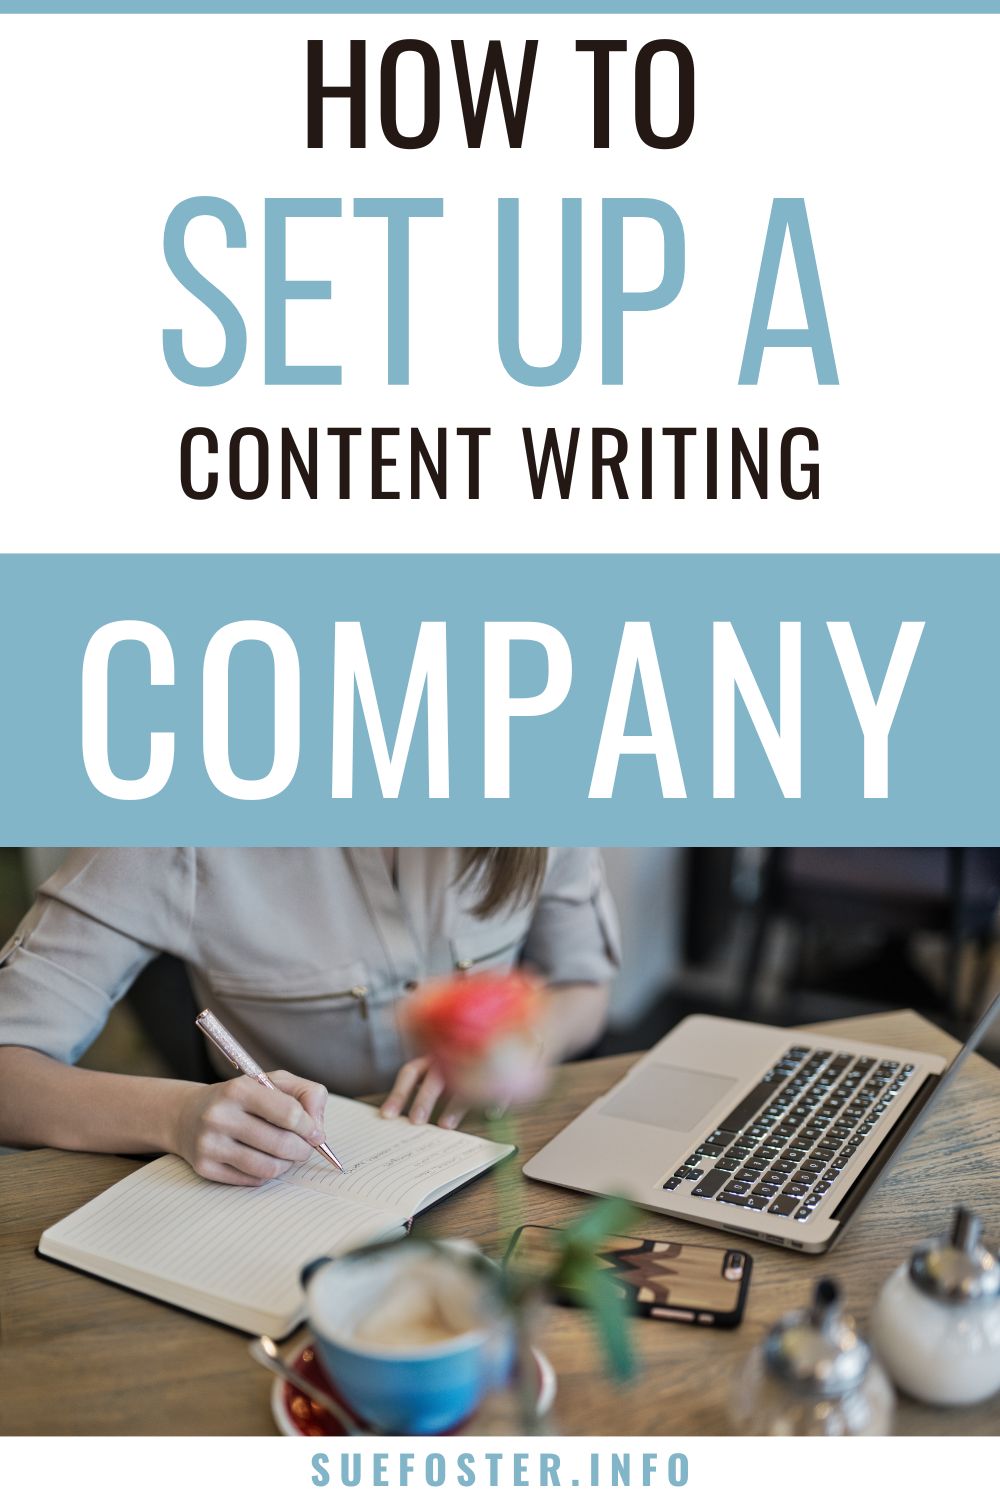 Starting a content writing business requires adequate preparation. To help you get started, follow these tips.